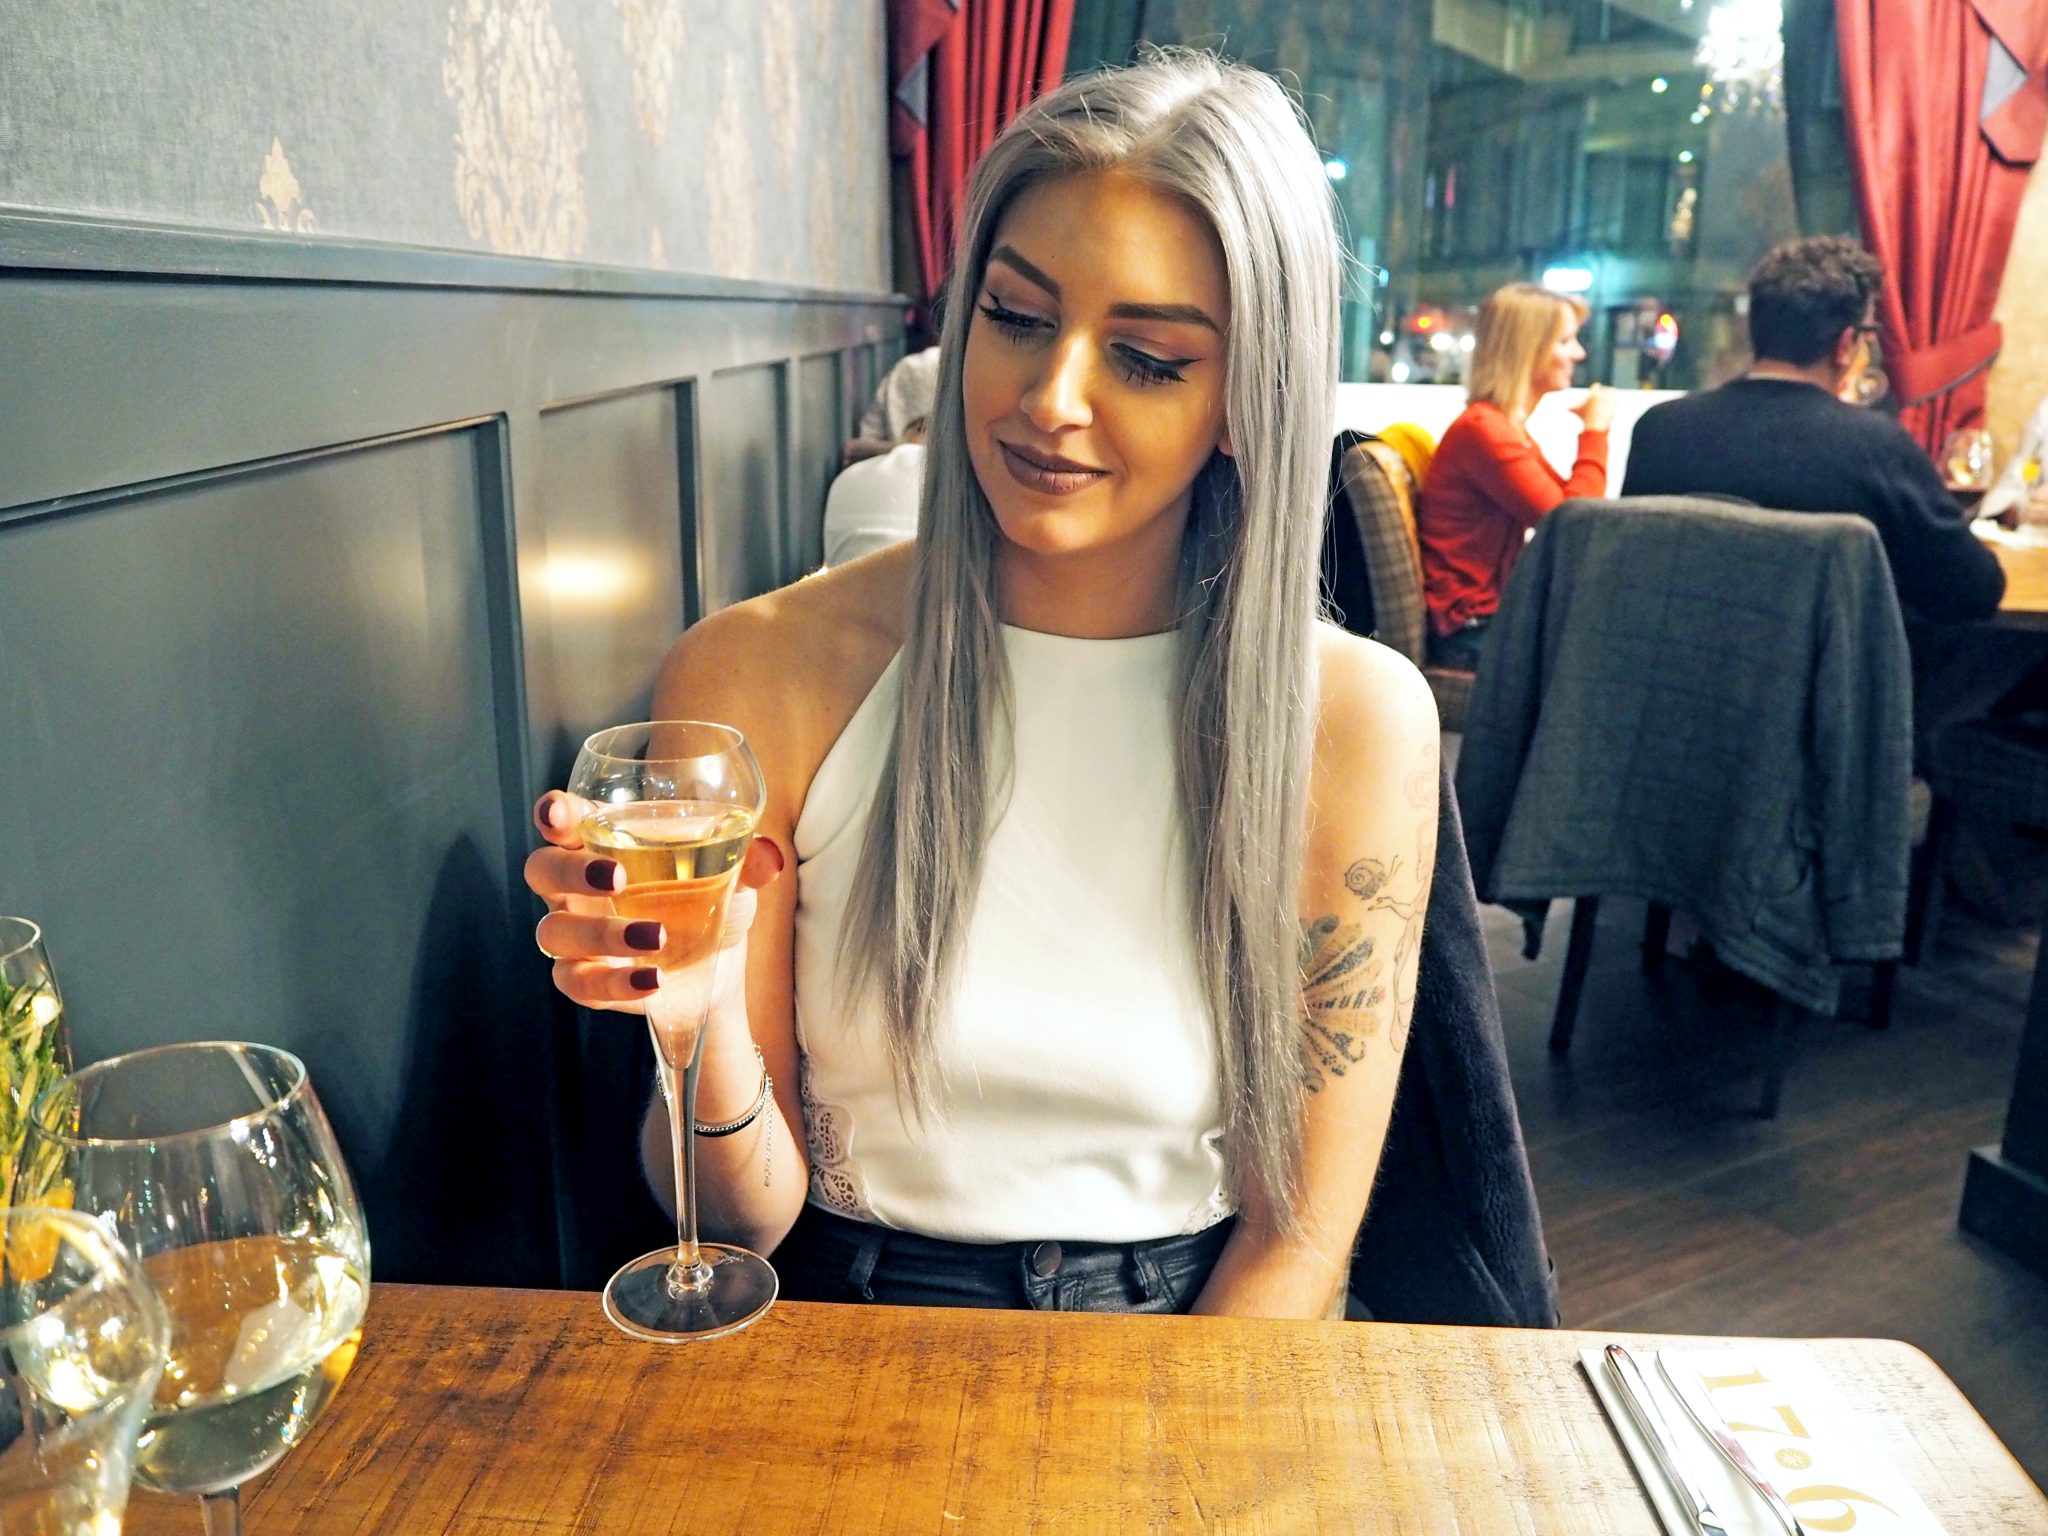 Laura Kate Lucas - Manchester Fashion, Food and Lifestyle Blogger | 1761 Restaurant and Bar Launch Review Manchester